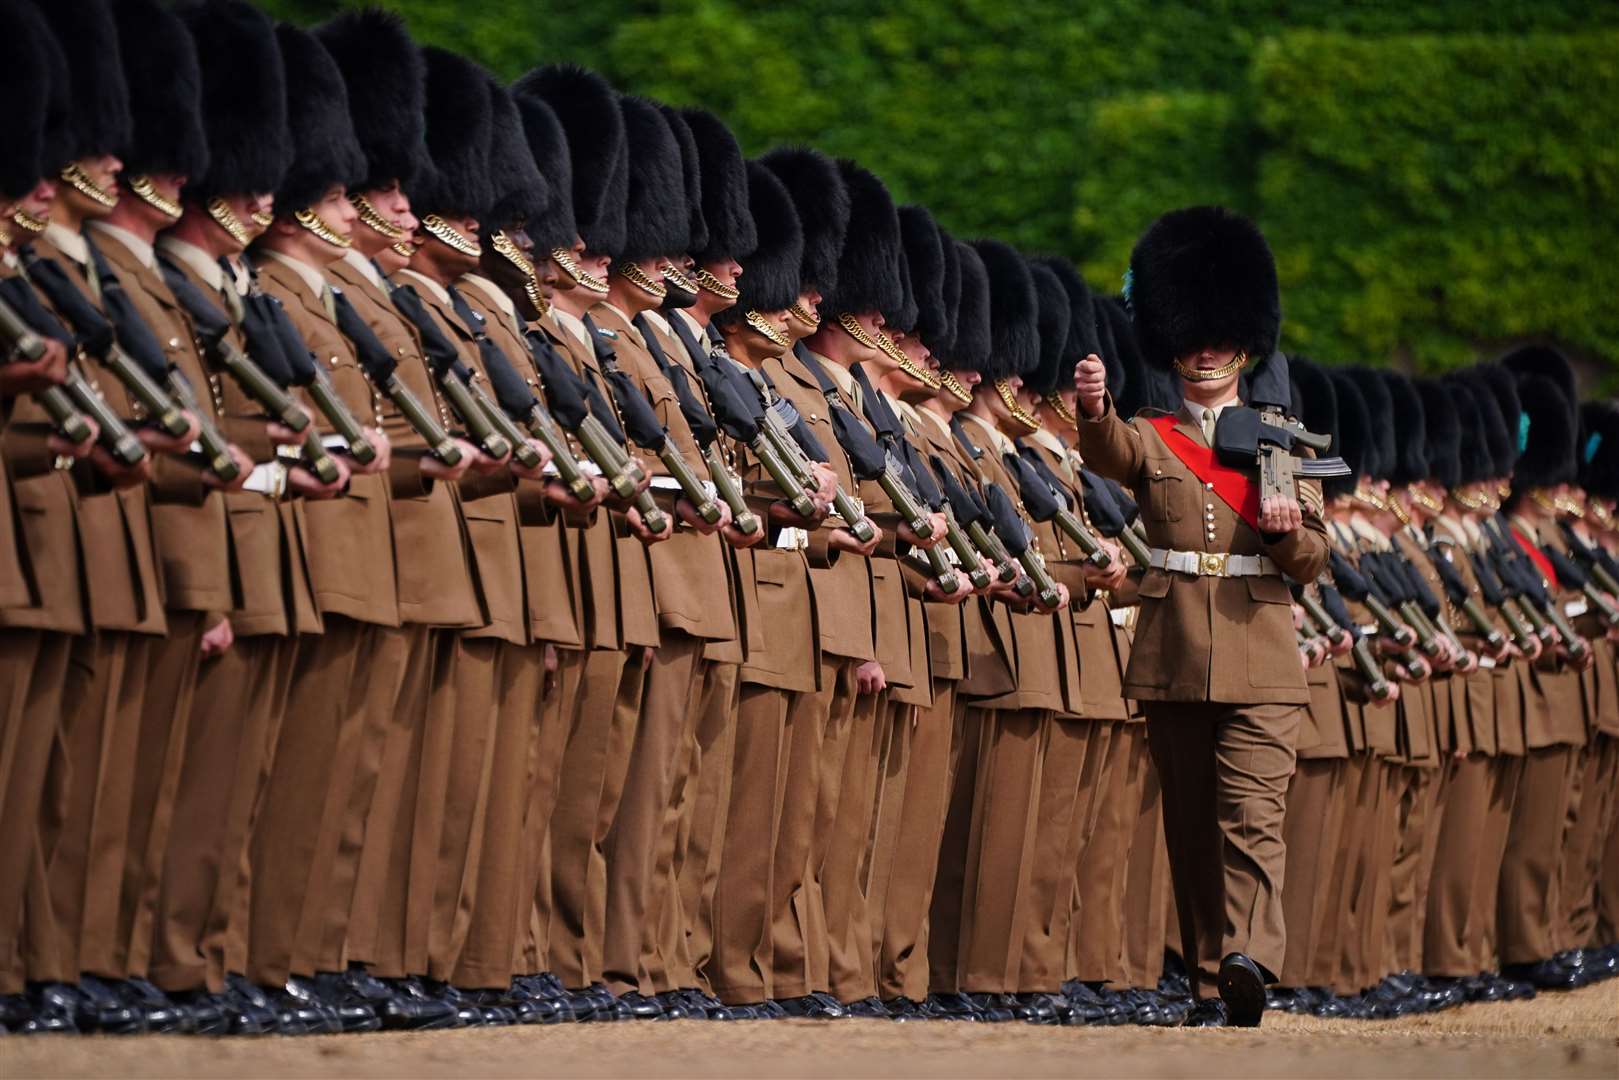 Military personnel line up at the Brigade Major’s Review on Thursday (PA/Dominic Lipinski)